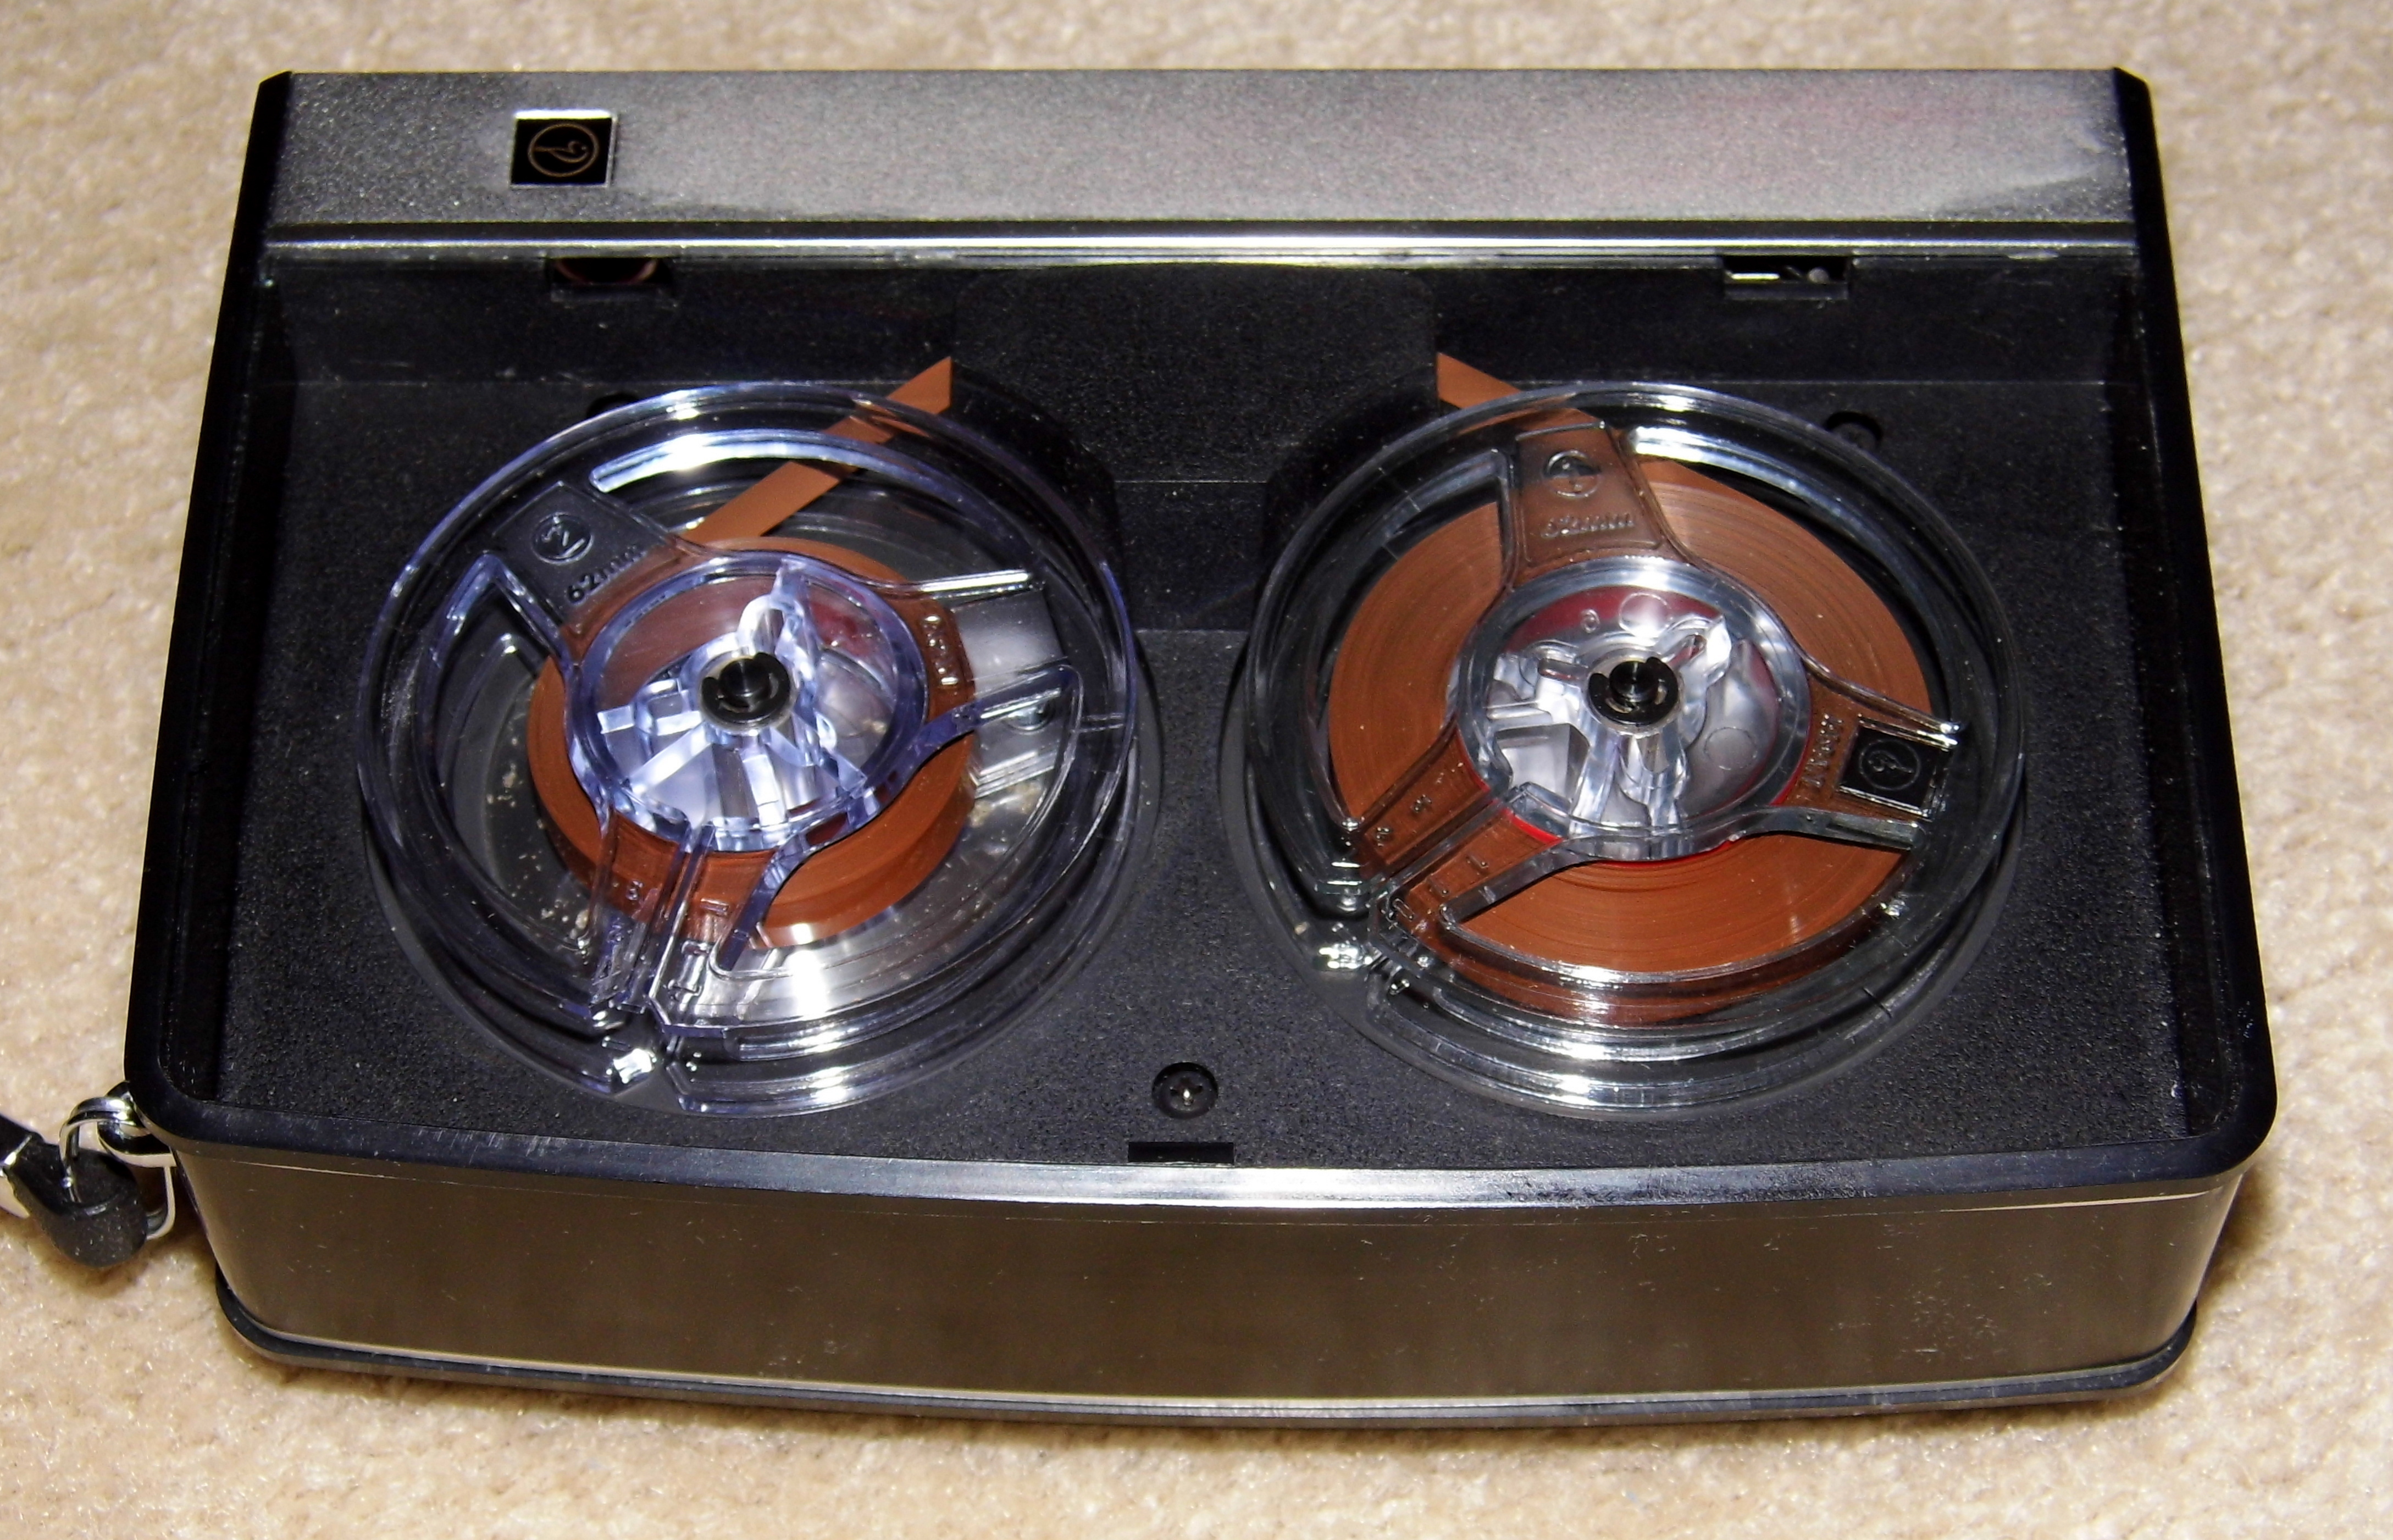 https://upload.wikimedia.org/wikipedia/commons/f/f3/Vintage_Concord_%22Sound_Camera%22_Reel-To-Reel_Tape_Recorder%2C_Model_F-20%2C_Made_In_Japan_%2814185093485%29.jpg